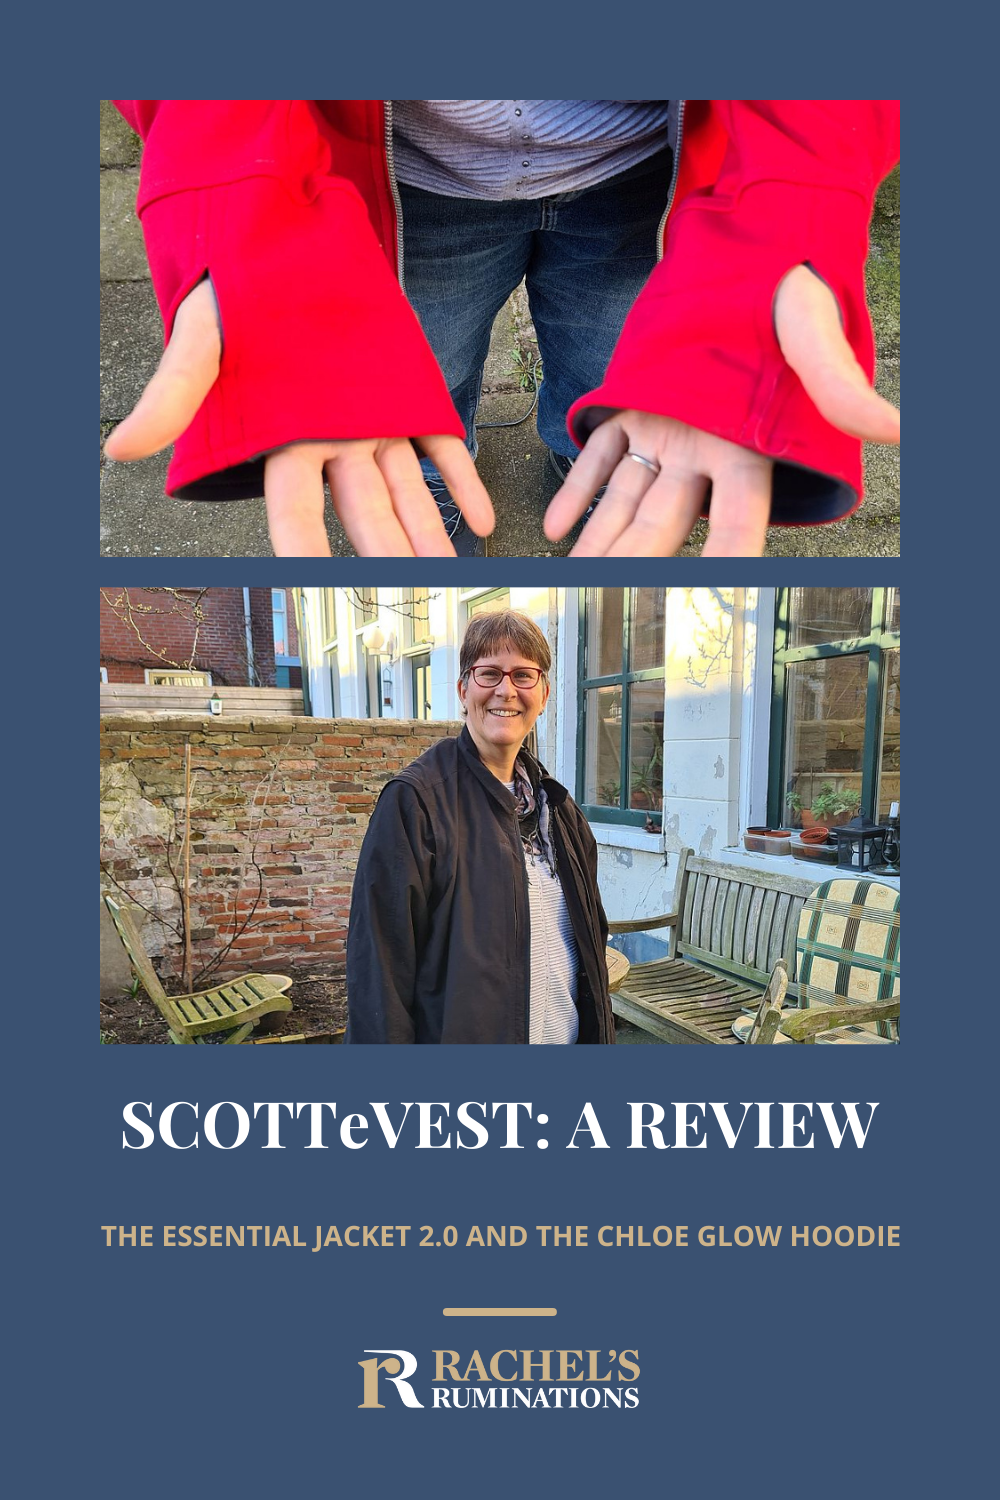 An update of an old review of a SCOTTeVEST travel vest, this version adds reviews of a jacket and a hoodie, and gets much more positive in the process. via @rachelsruminations